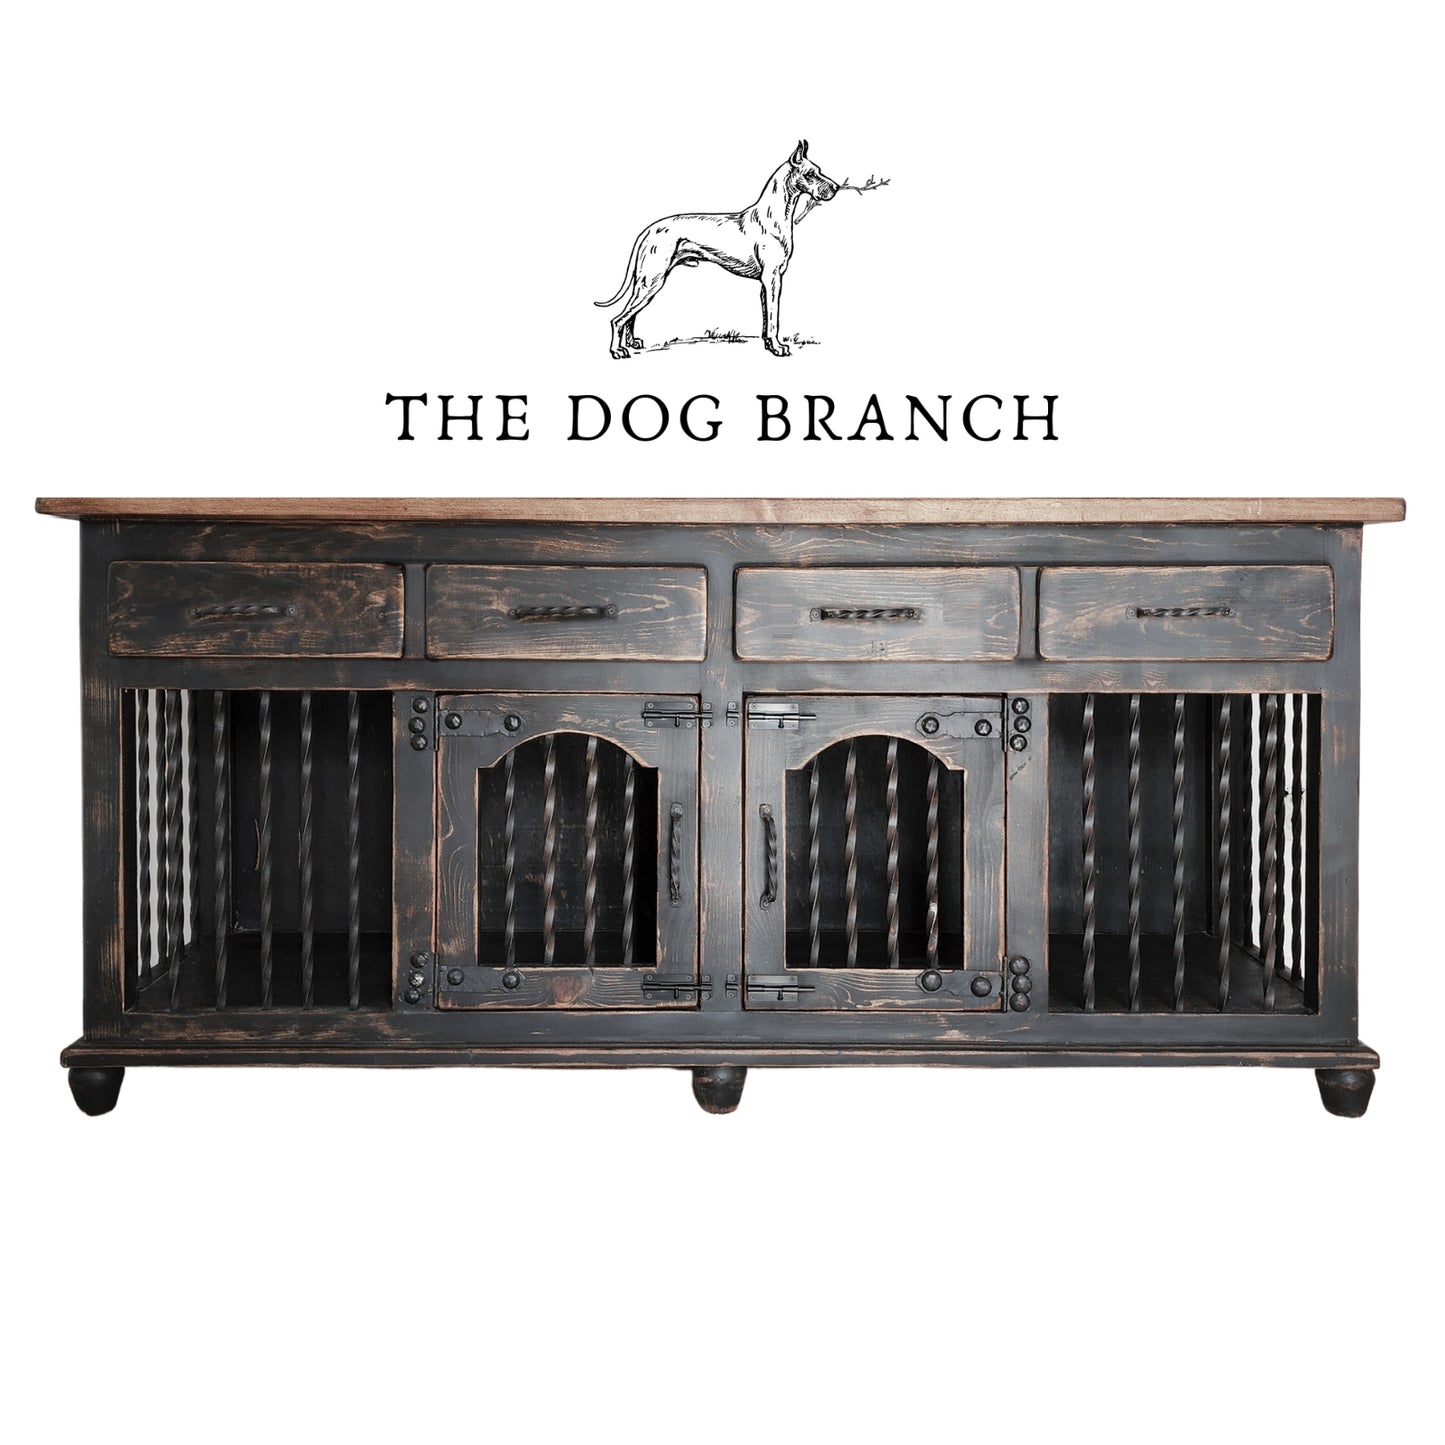 Best Seller 80"L x 28"W x 36H Dog crate furniture - Rustic cottage collection - Distressed Black